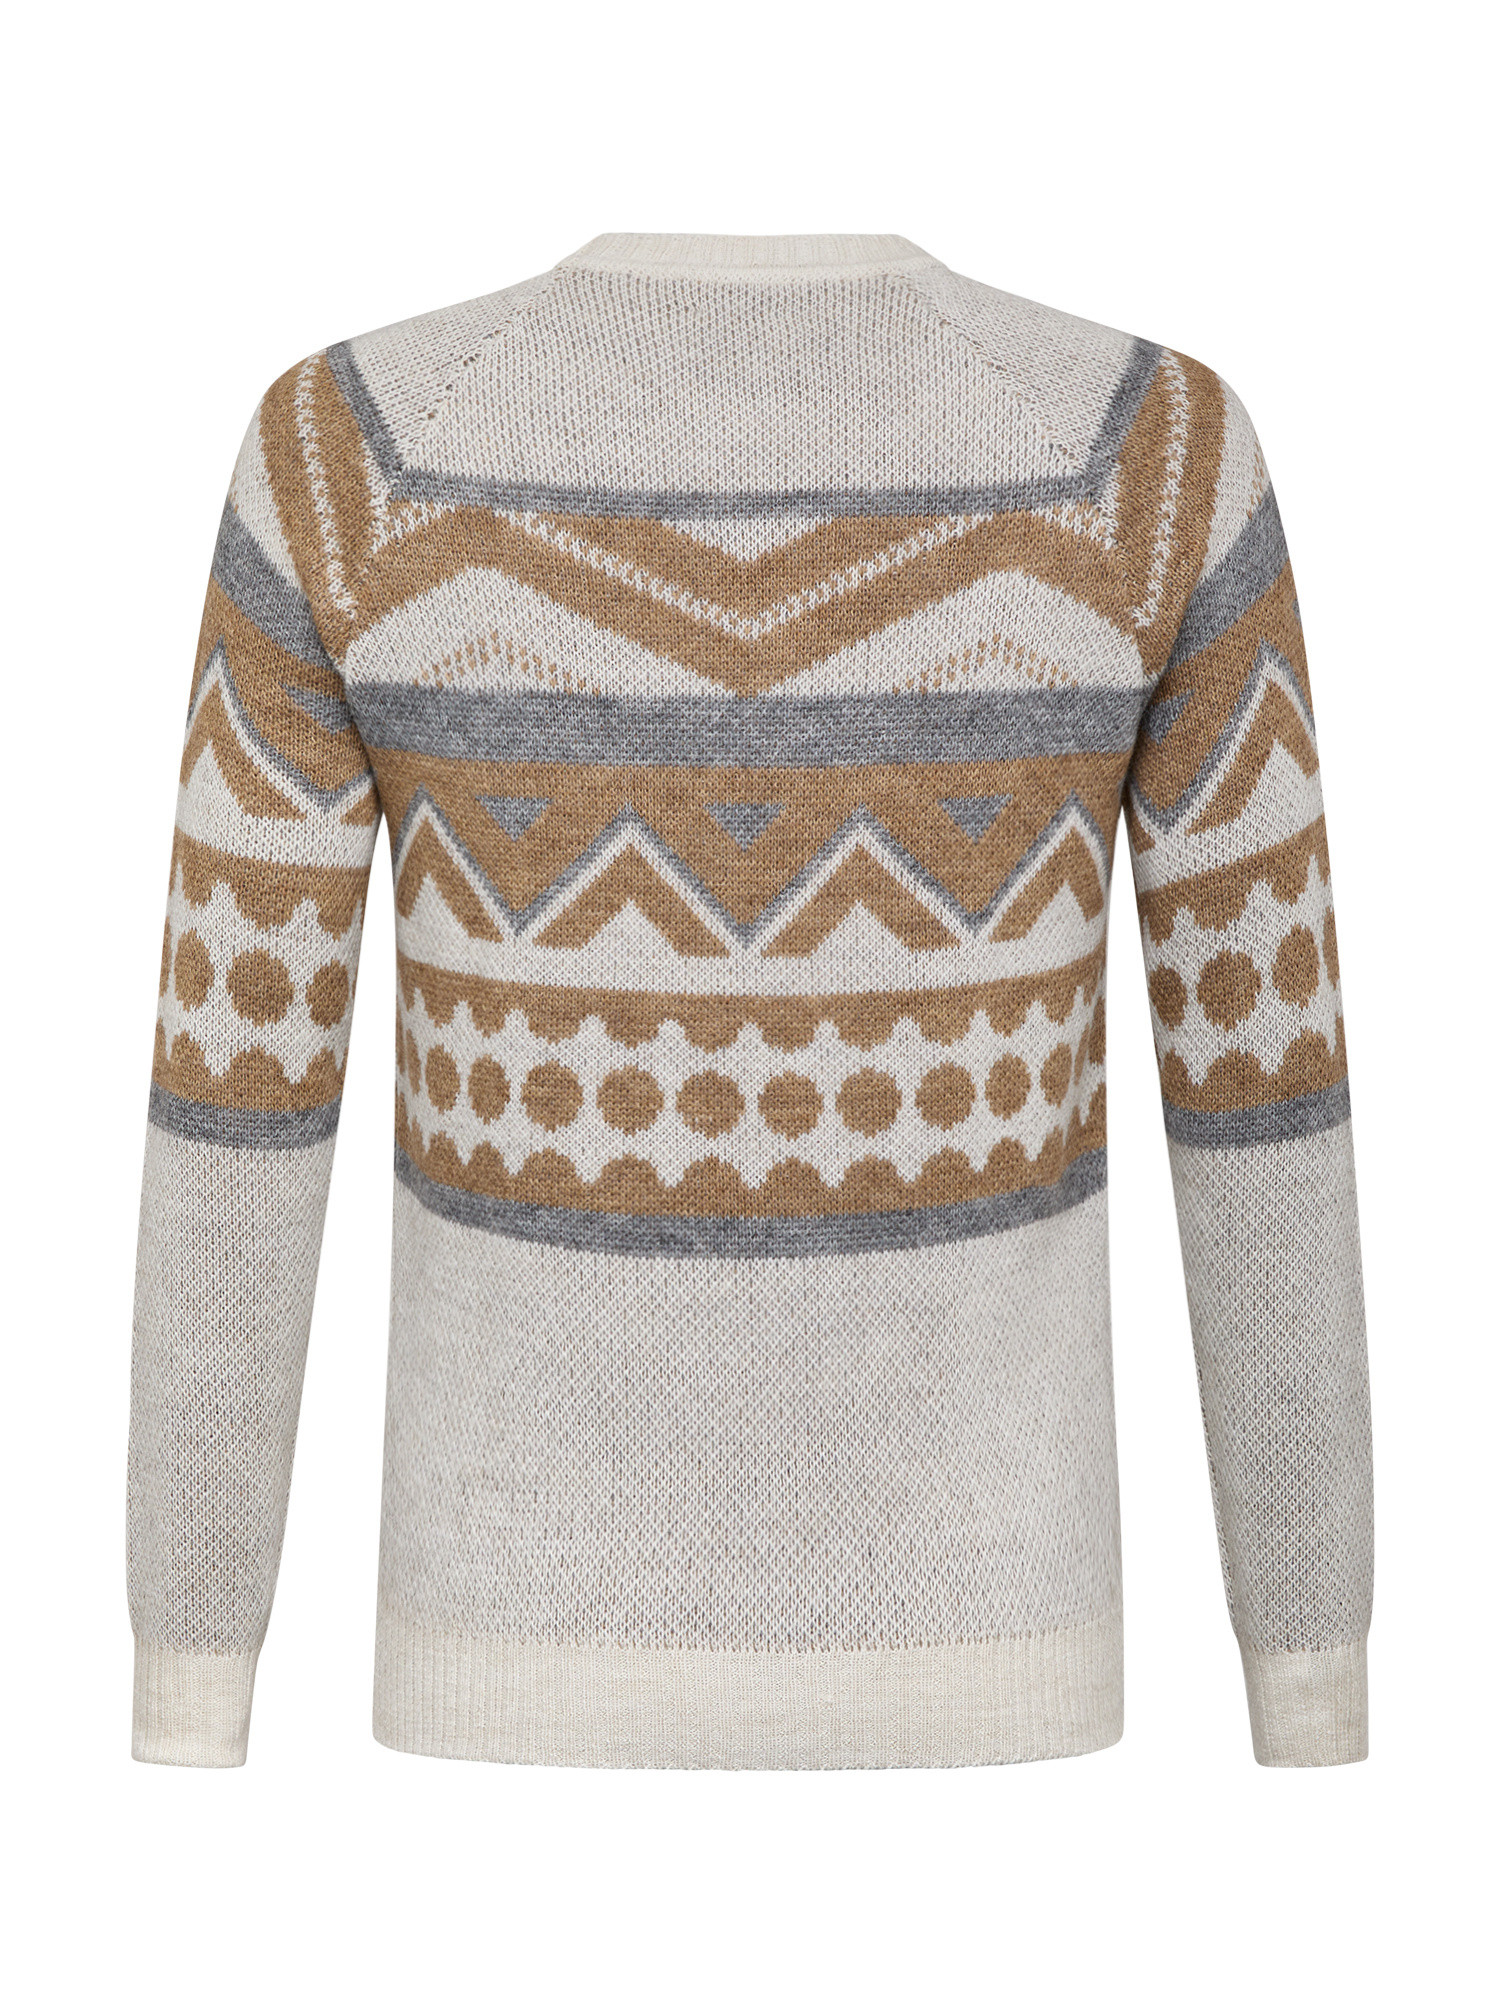 Luca D'Altieri - Christmas sweater in wool and alpaca blend, White, large image number 1